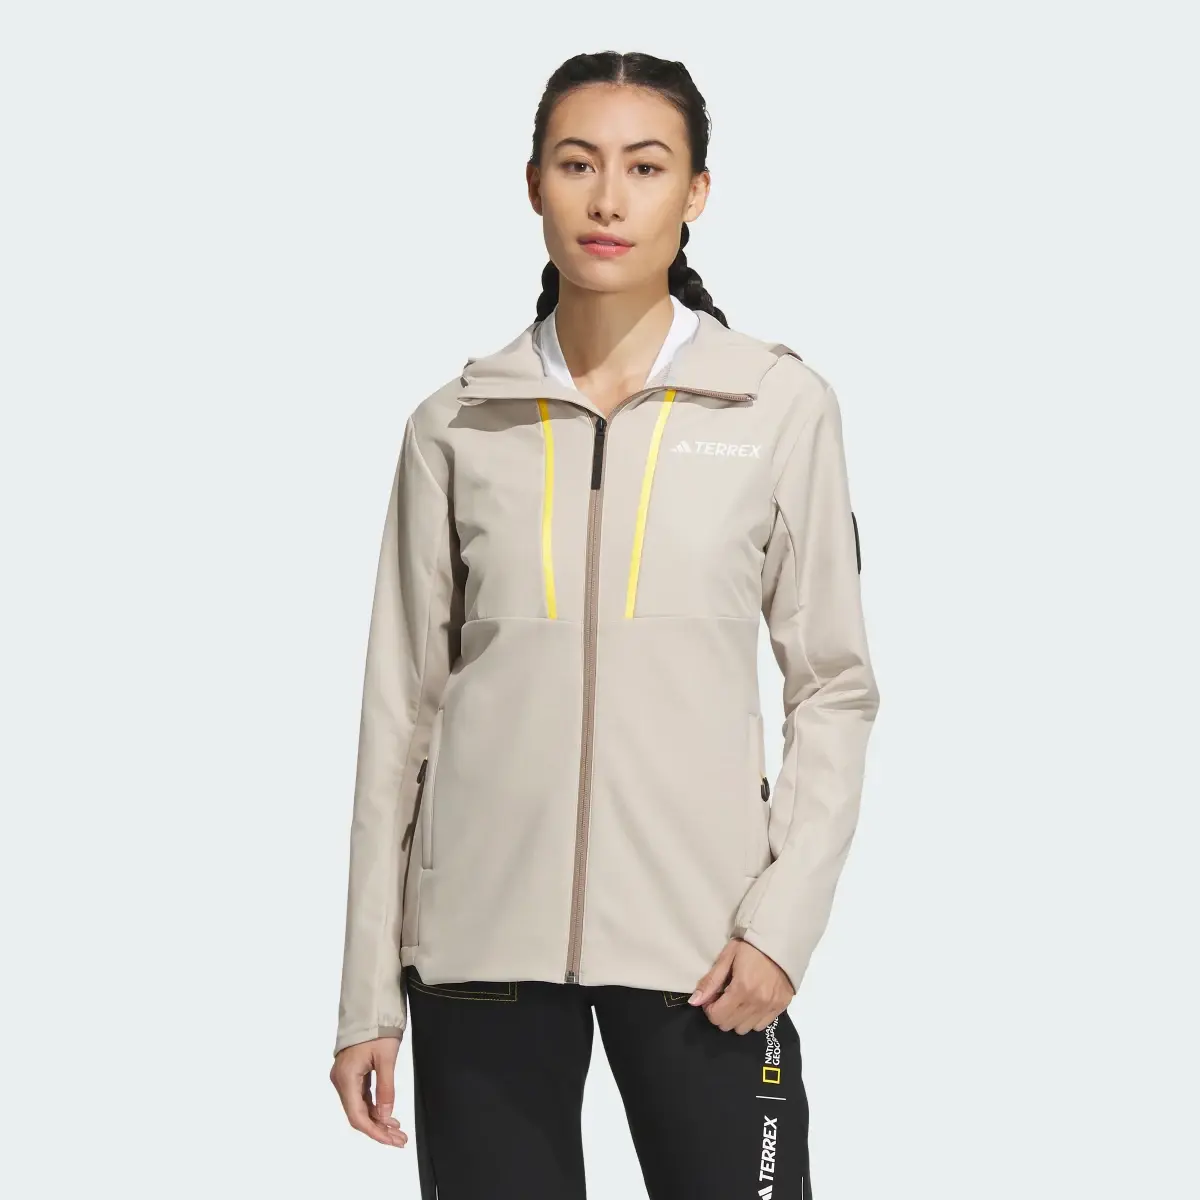 Adidas Veste soft shell National Geographic. 2